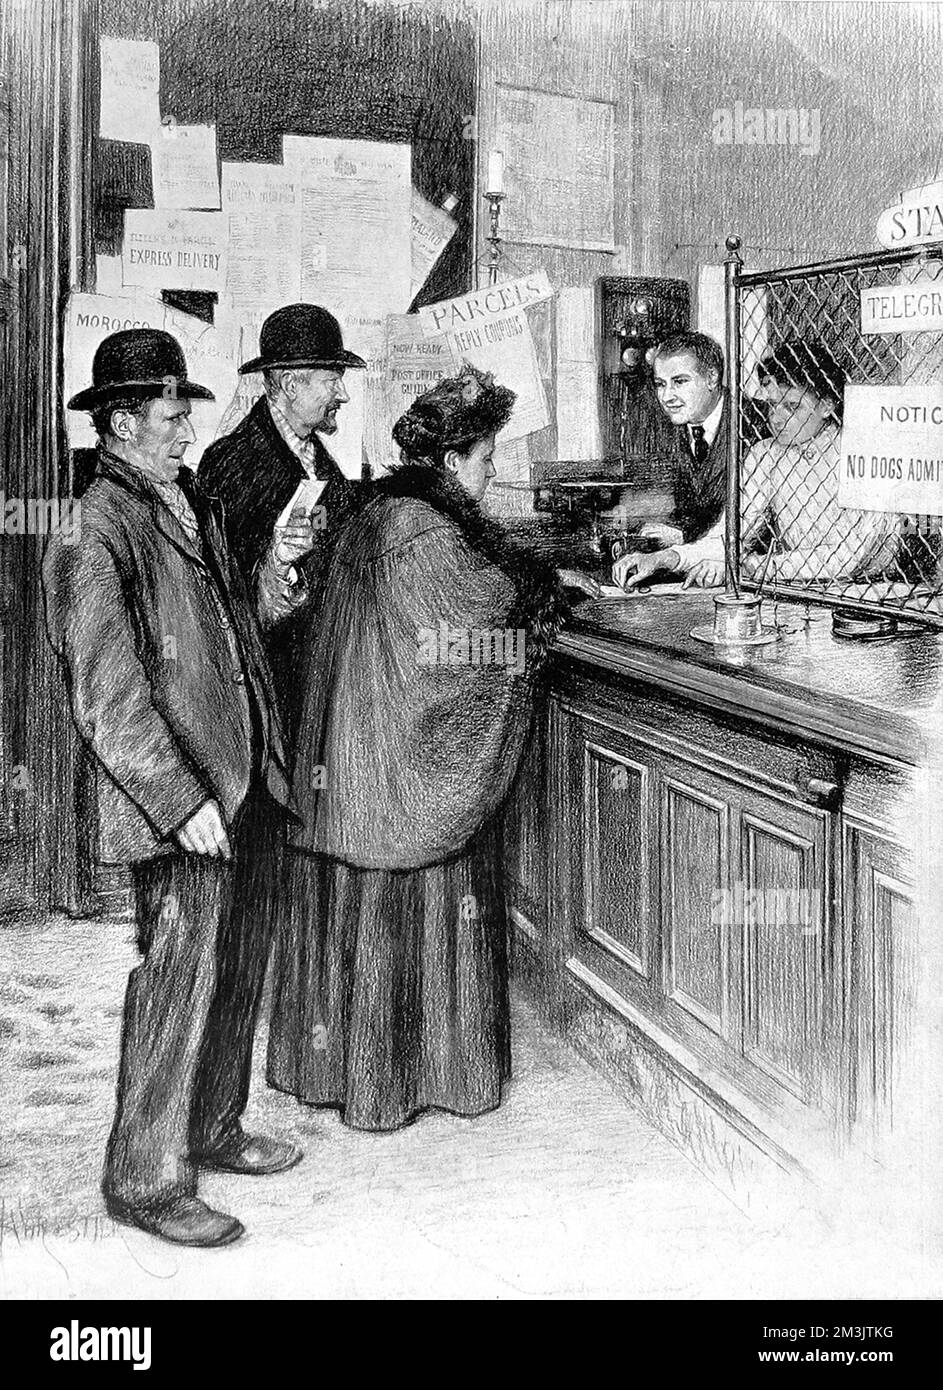 Collecting the first weekly pension instalment at the post office. The Old Age Pension Act was introduced by David Lloyd George in 1908 with the first pensions available on the 1st of January 1909. Weekly payments were made to all those who had qualified for the benefit, a total of 528000 claims at the time. Stock Photo